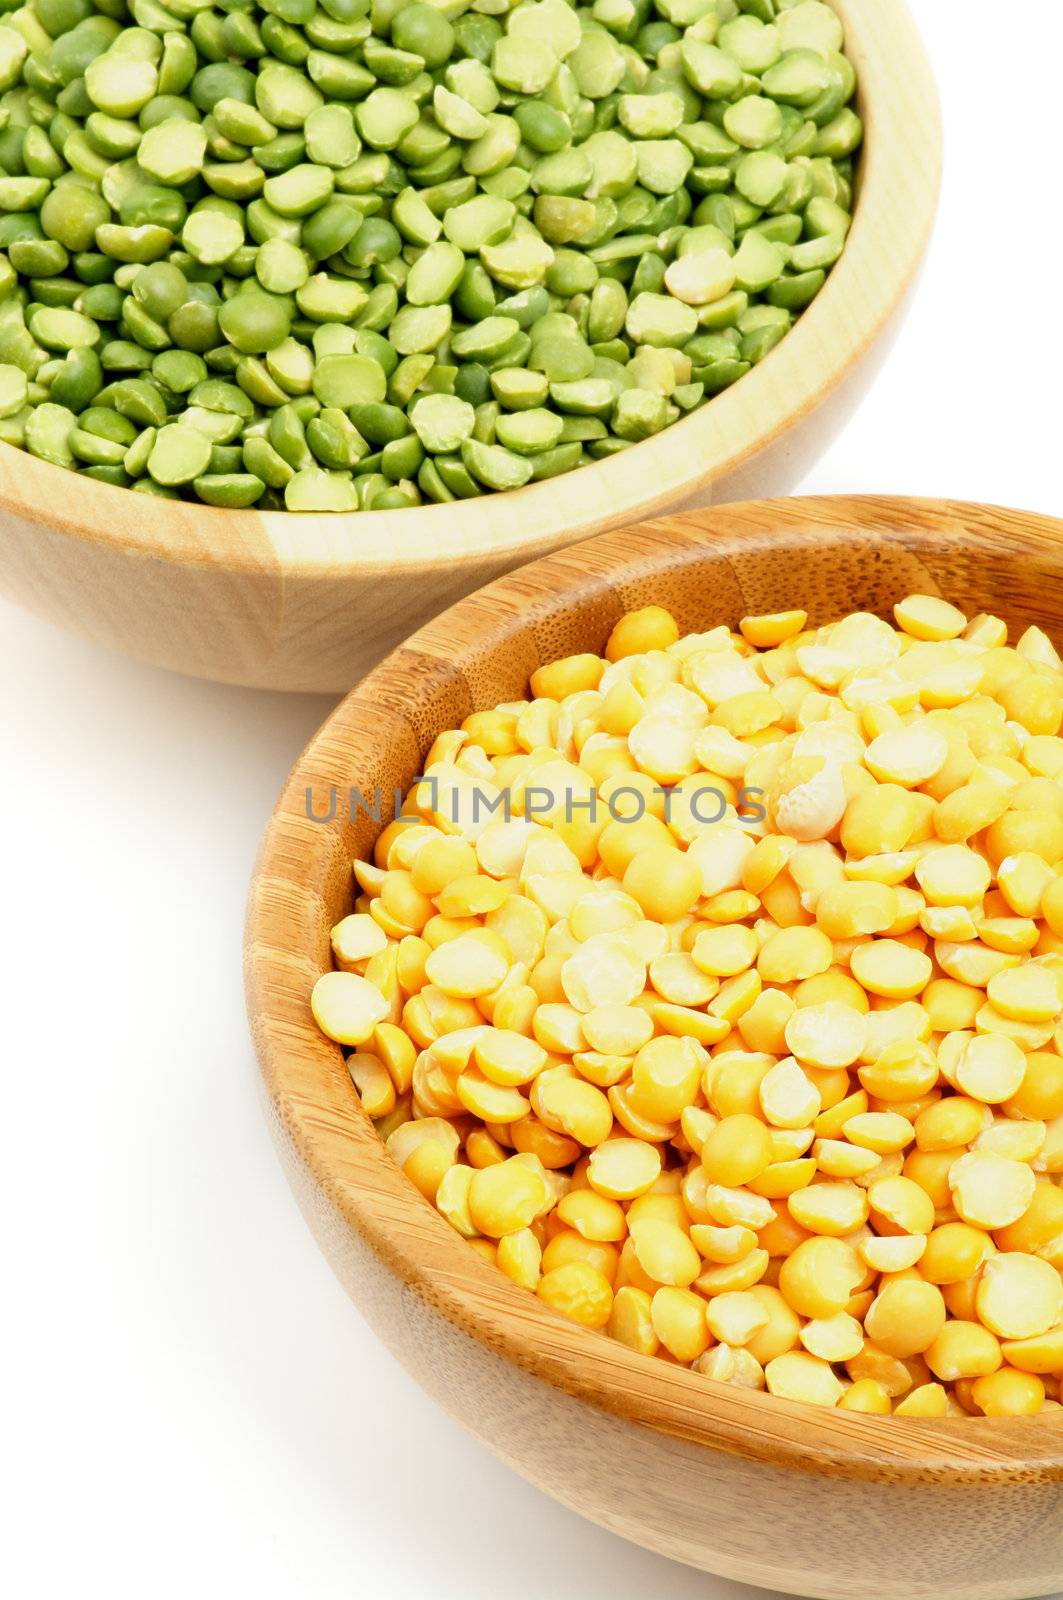 Green and Yellow Peas by zhekos